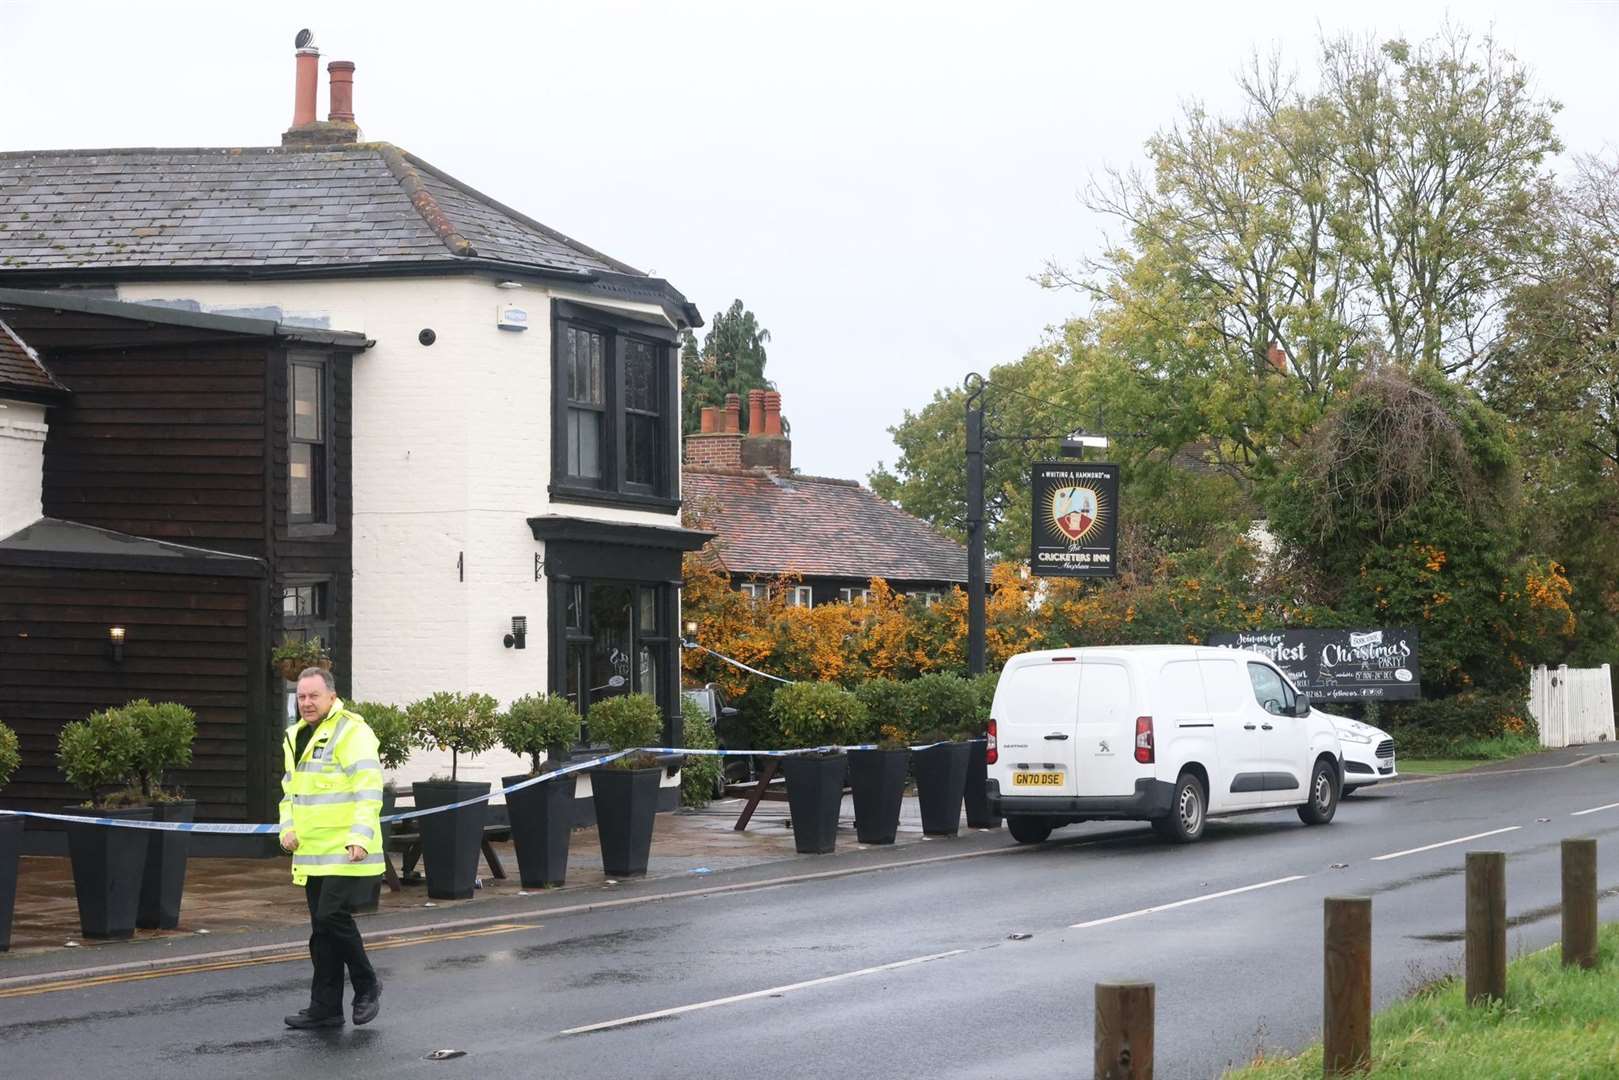 The Cricketers Inn pub in Meopham where a fatal stabbing took place. Picture: UKNIP